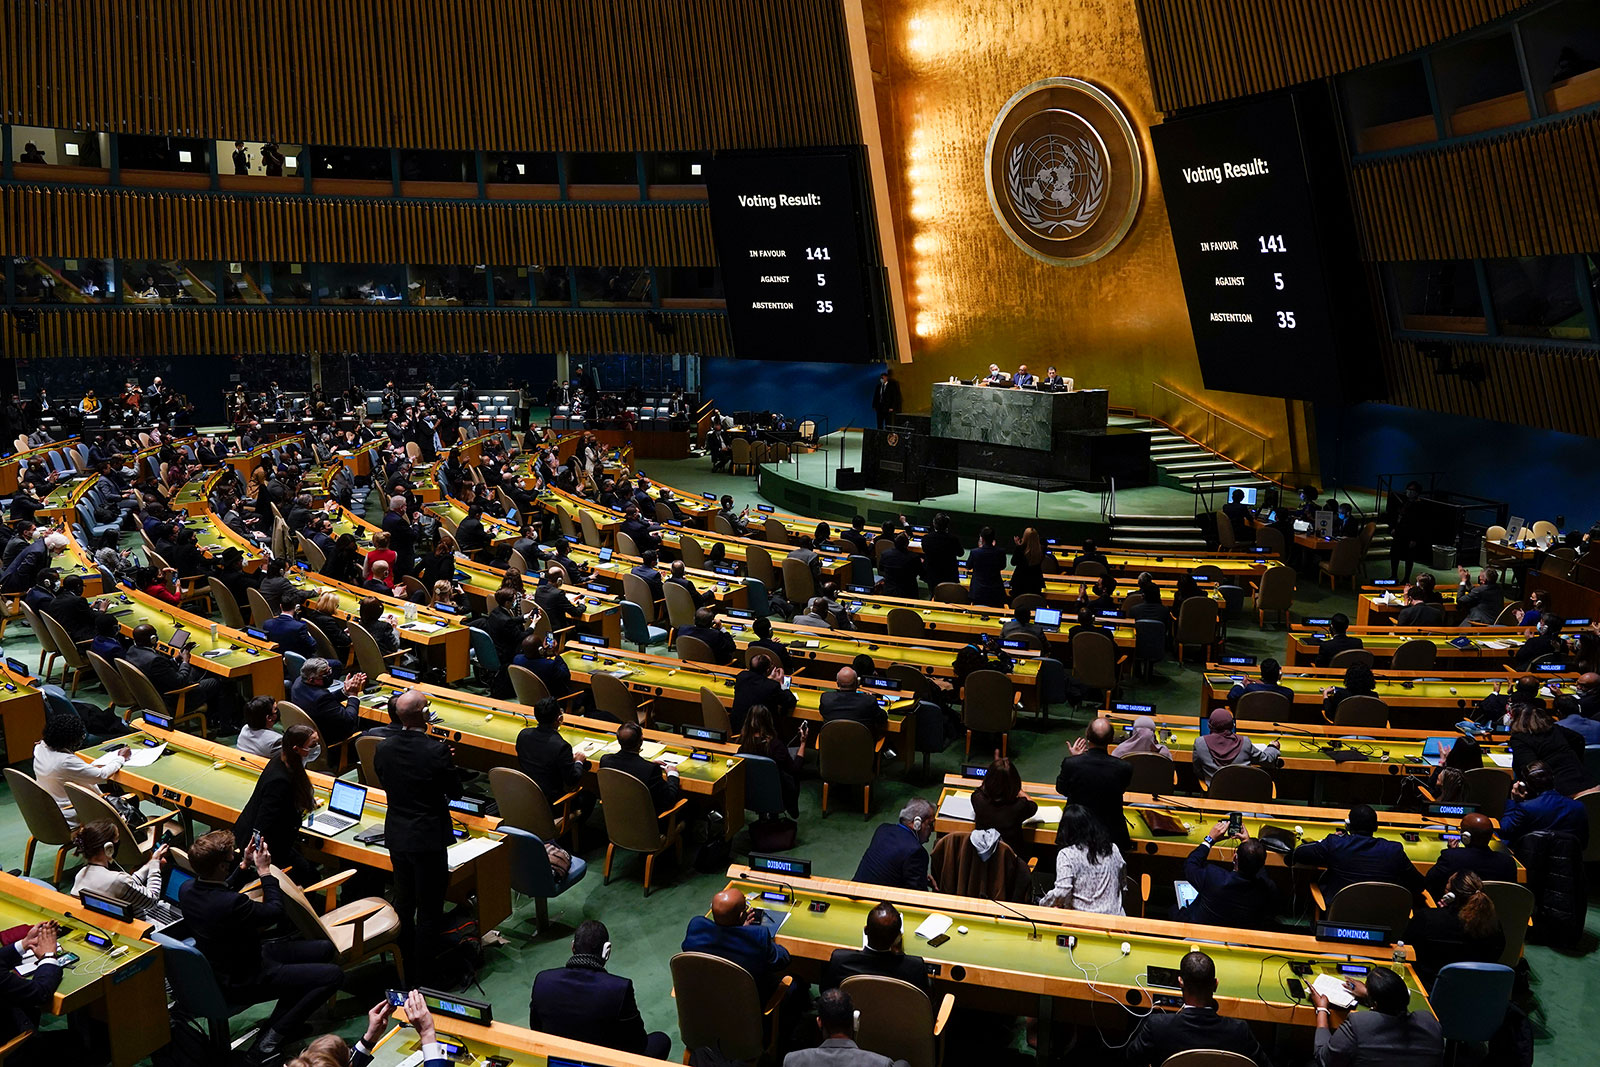 Voting results are displayed on screens at the United Nations General Assembly on March 2.